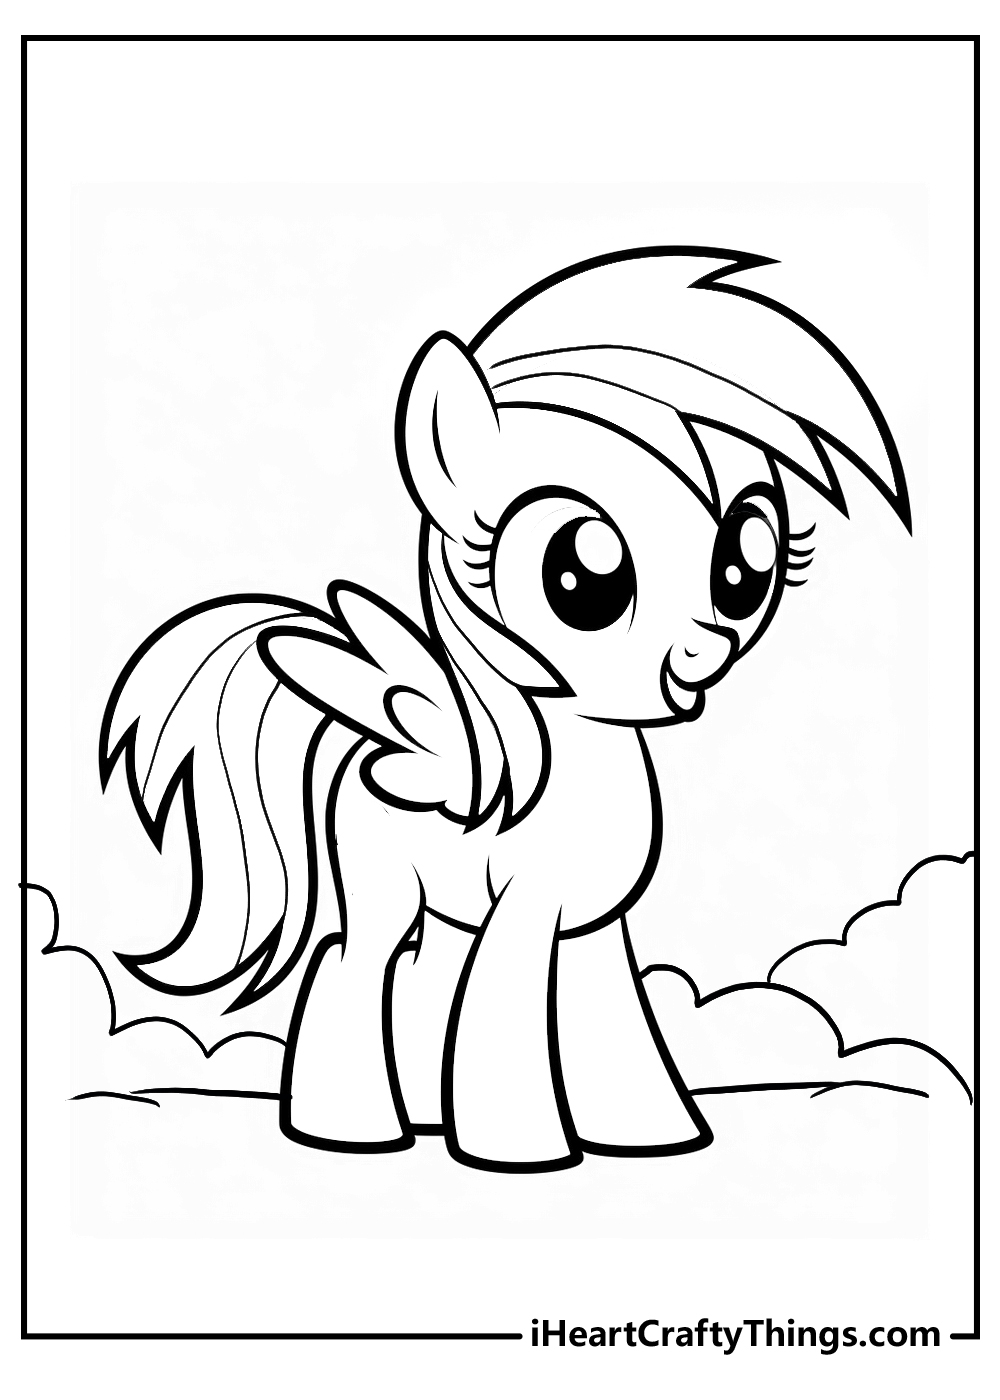 rainbow dash coloring pages